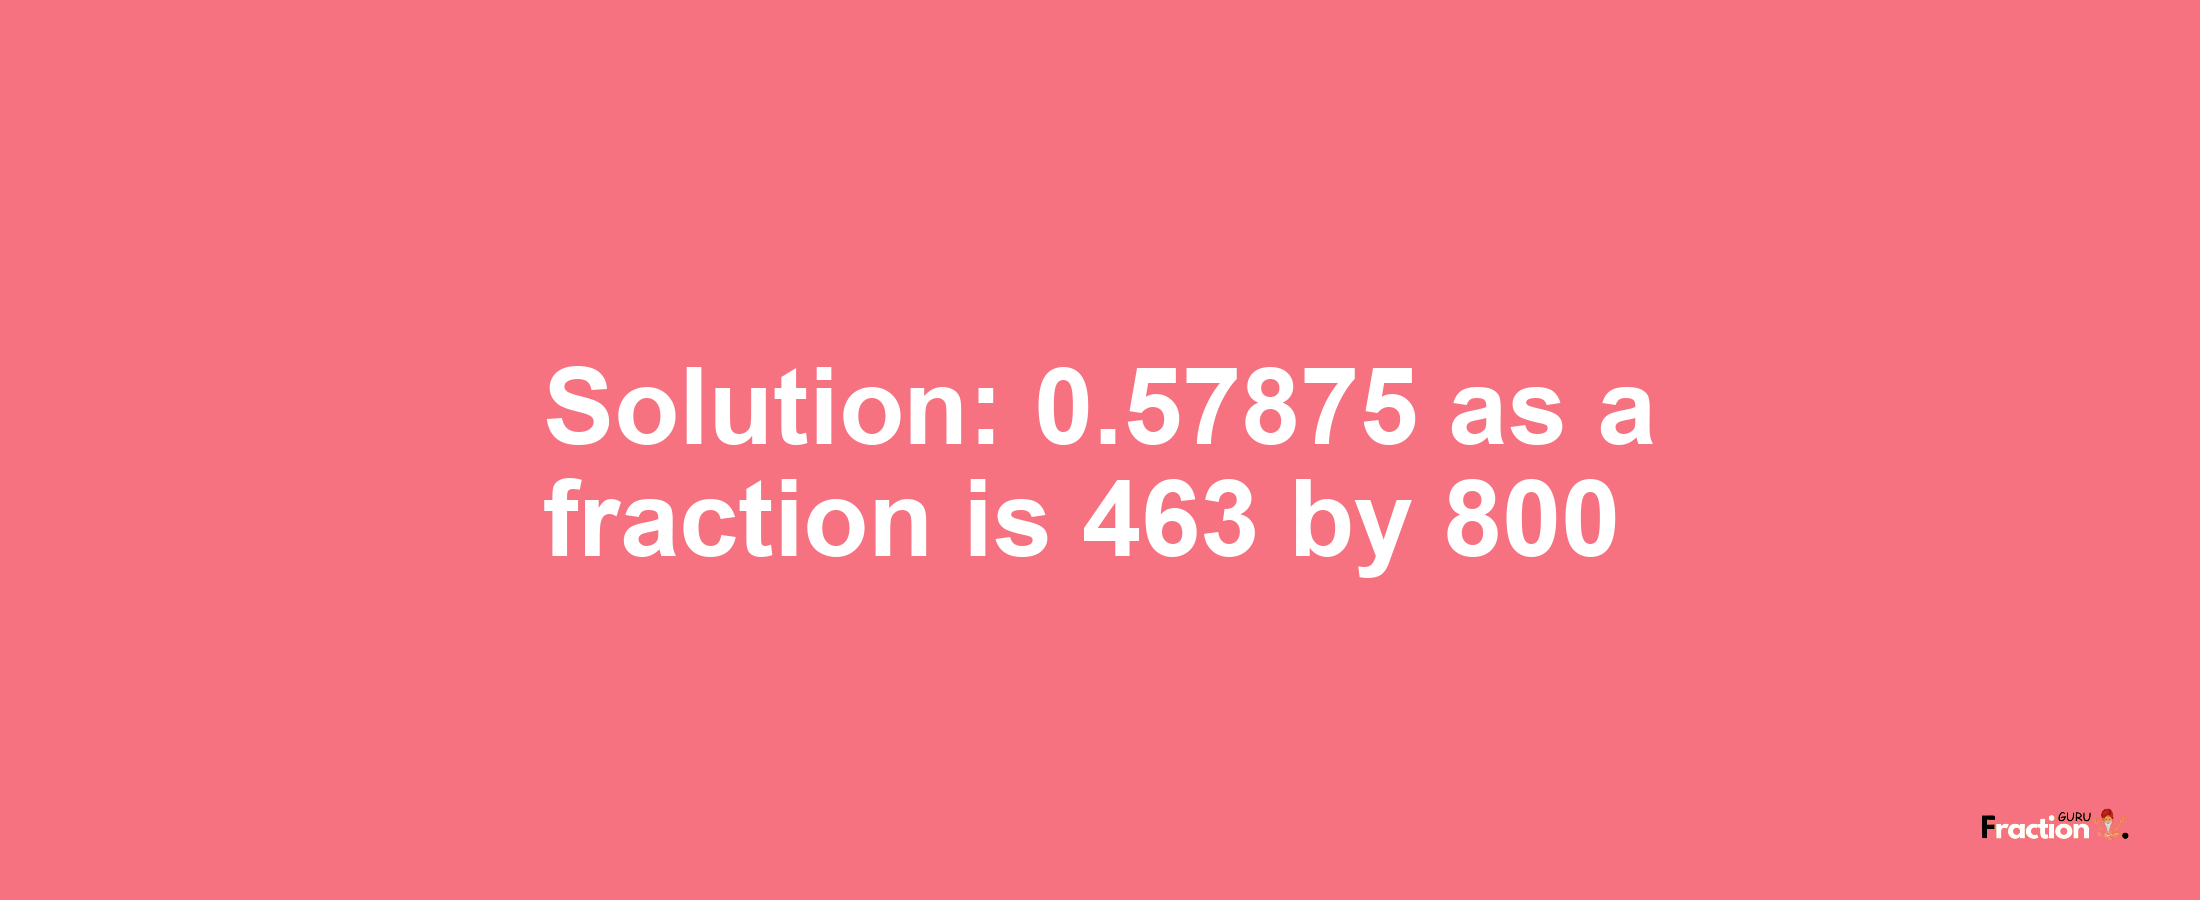 Solution:0.57875 as a fraction is 463/800